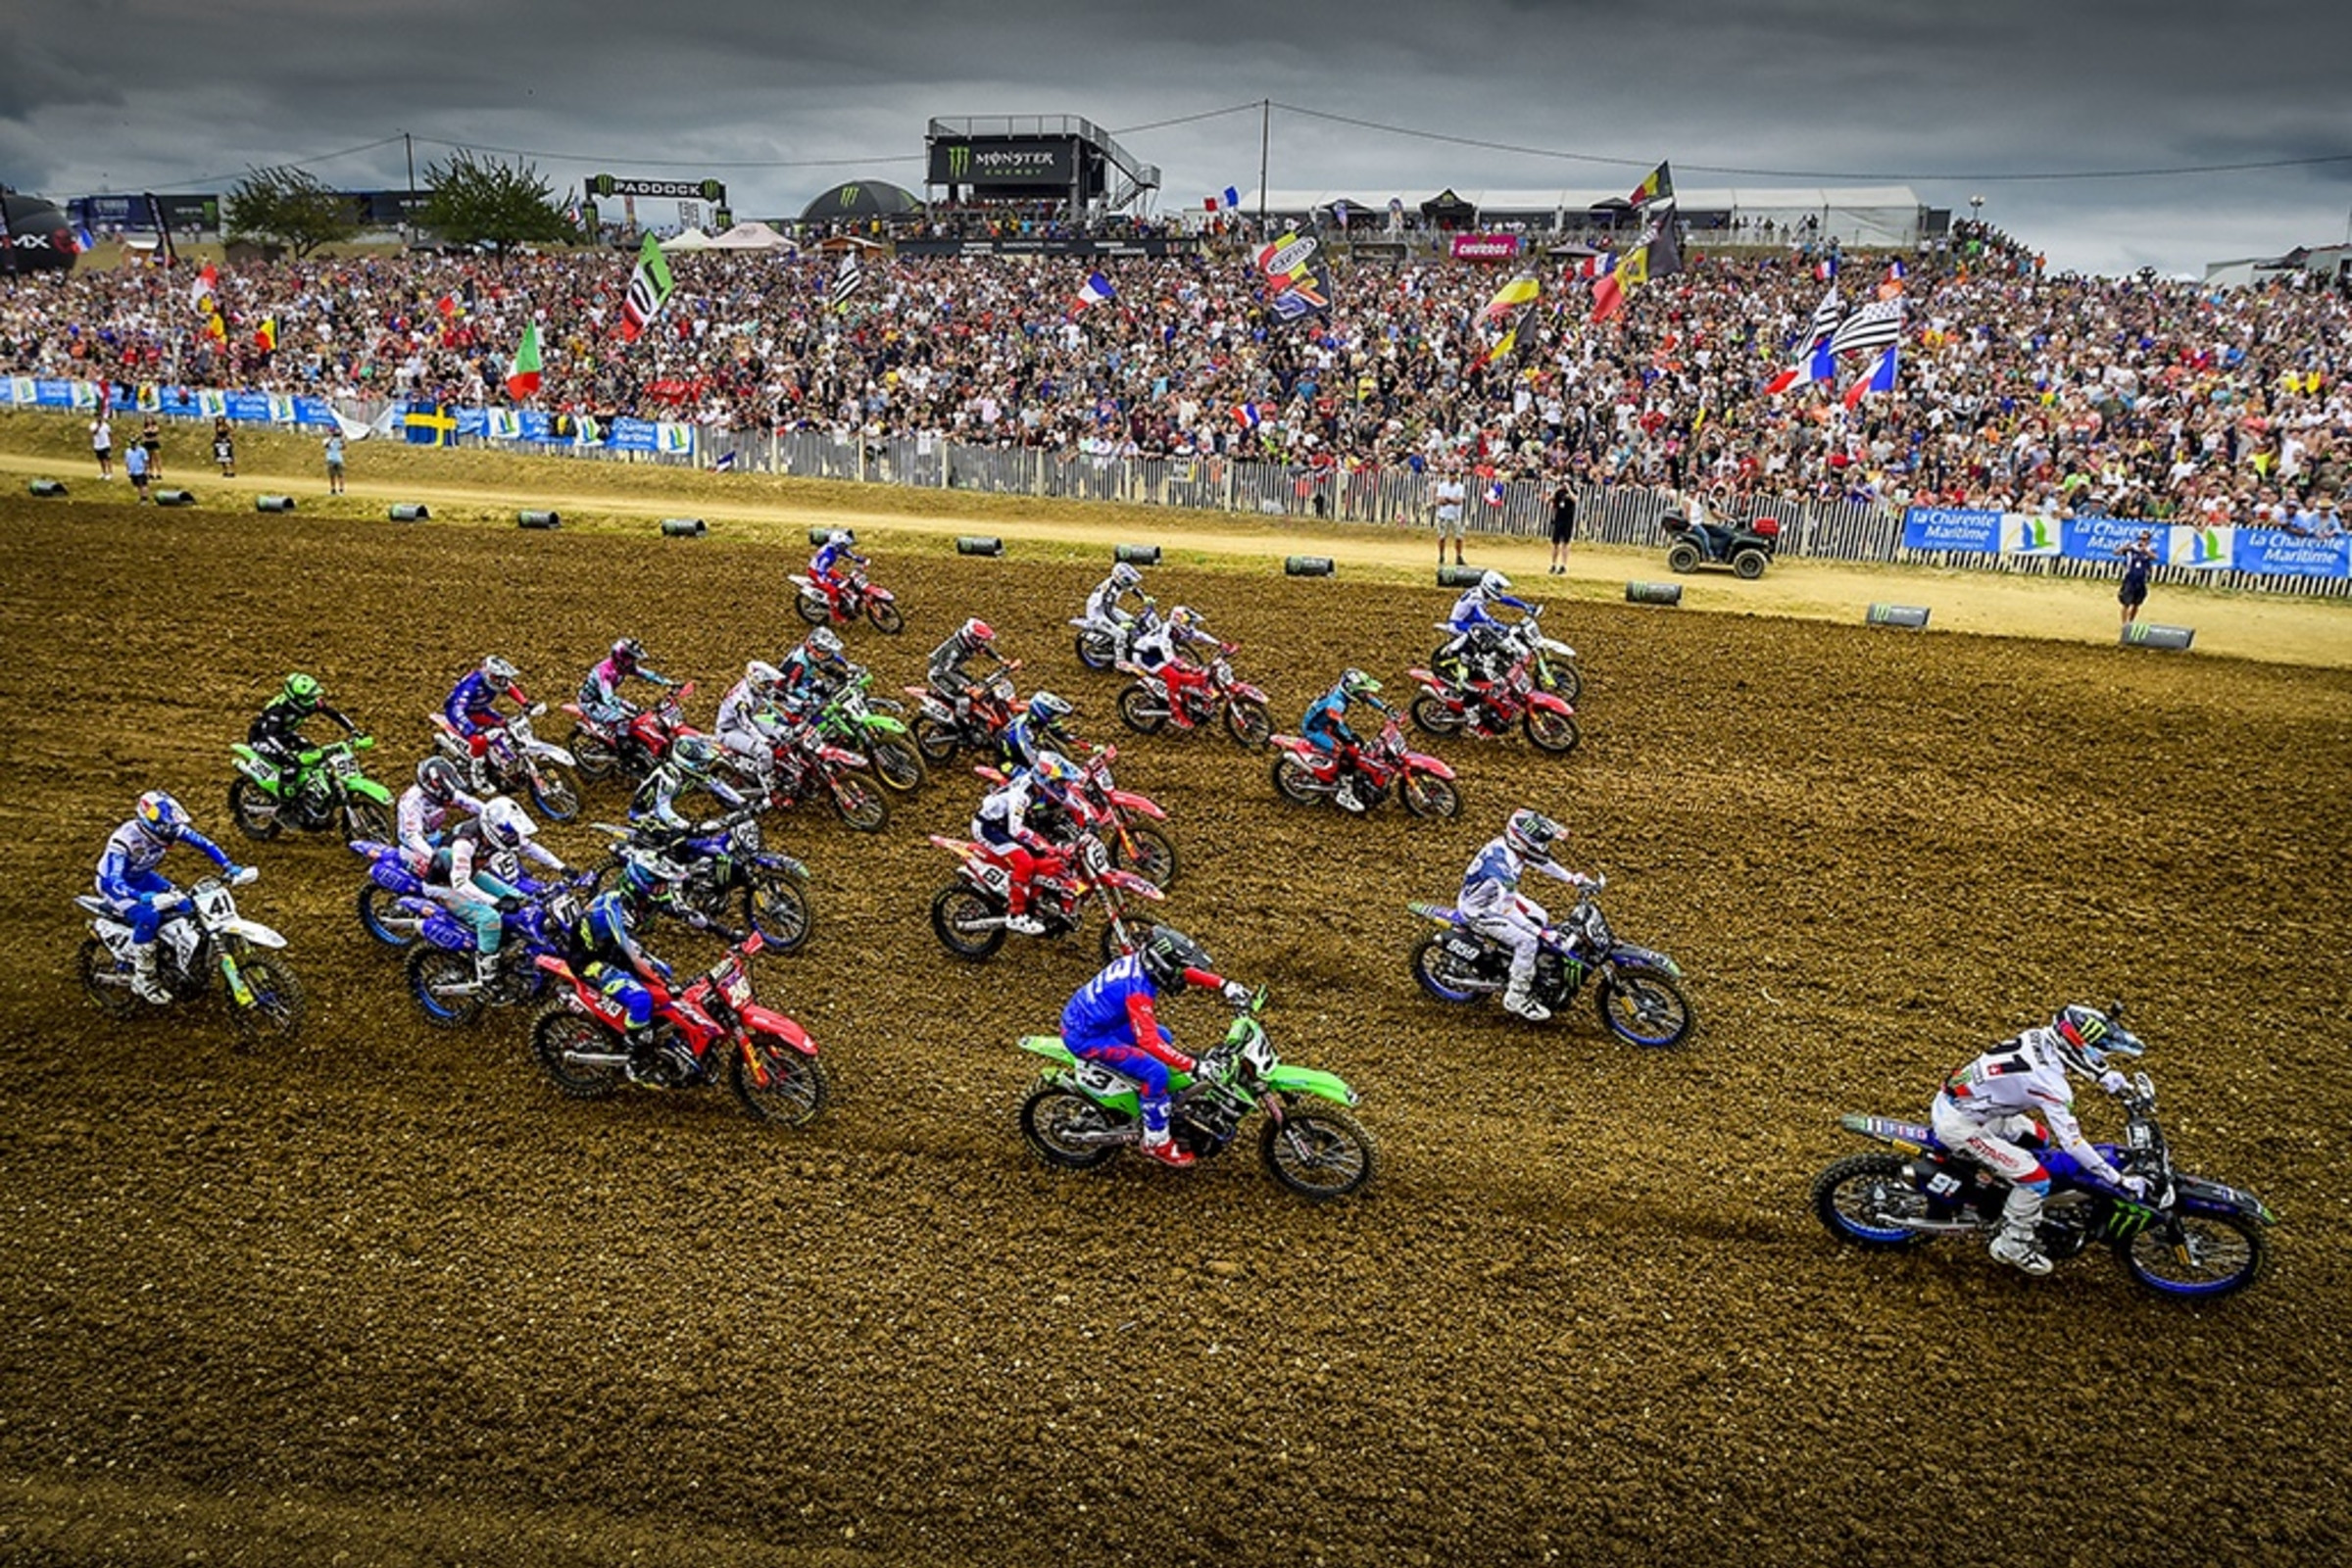 2022 MXGP of Charente Maritime Podcast and Recap